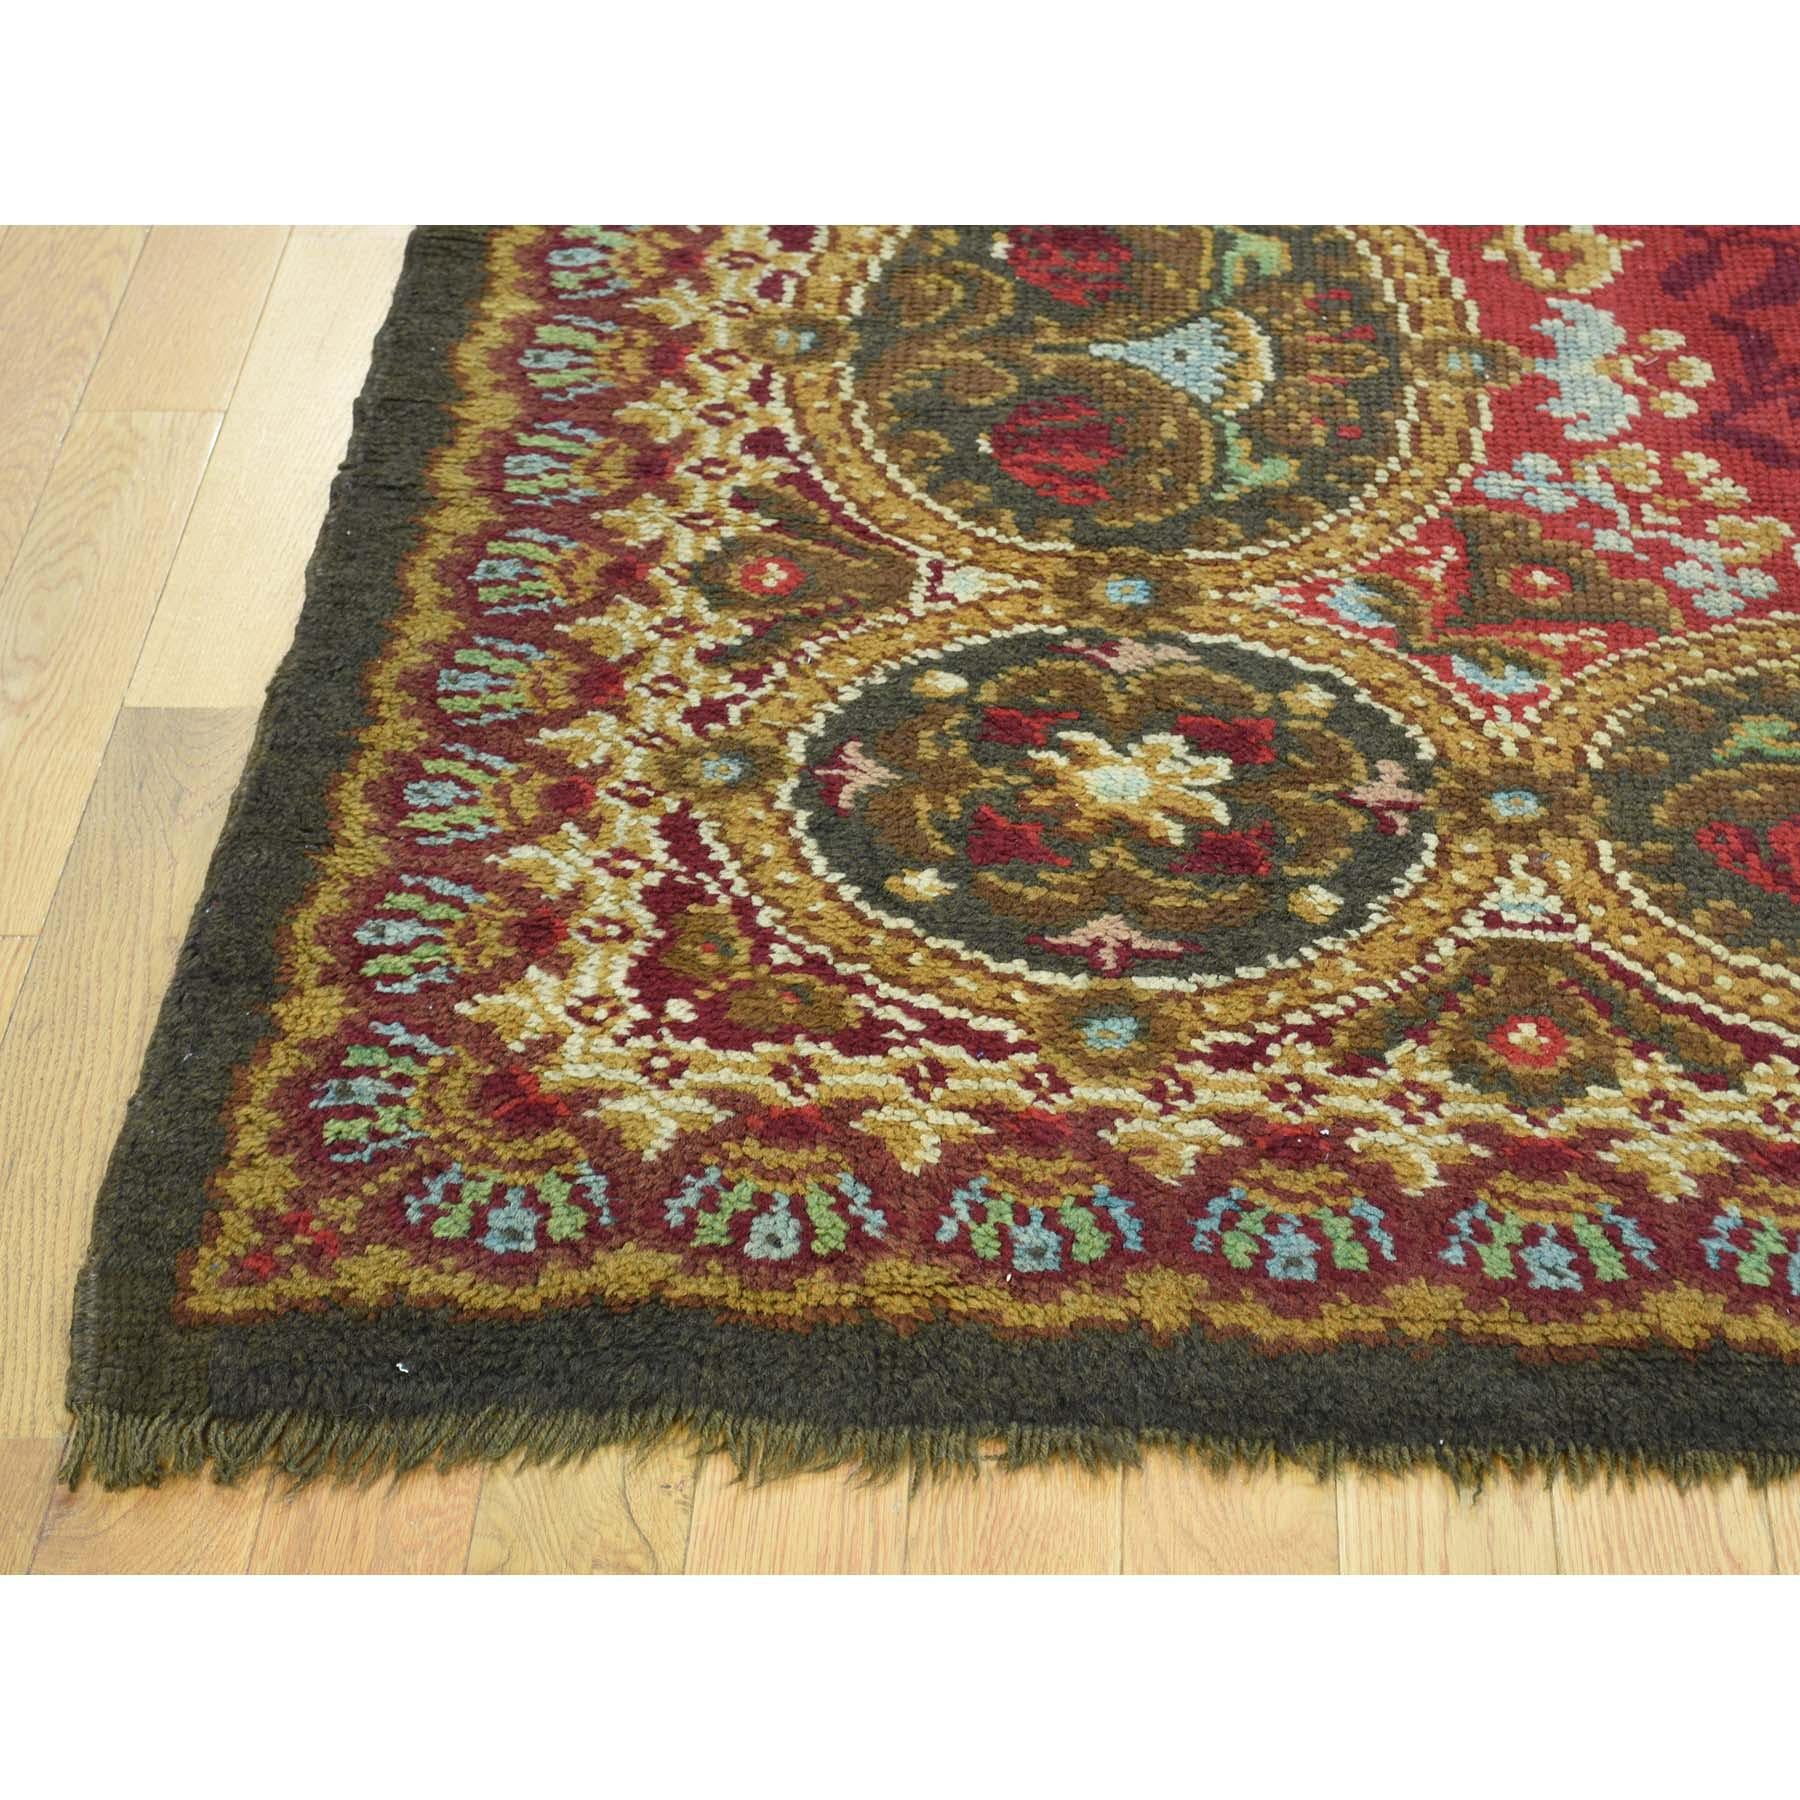 Antique European Donegal Pure Wool Oversize Oriental Rug In Good Condition For Sale In Carlstadt, NJ